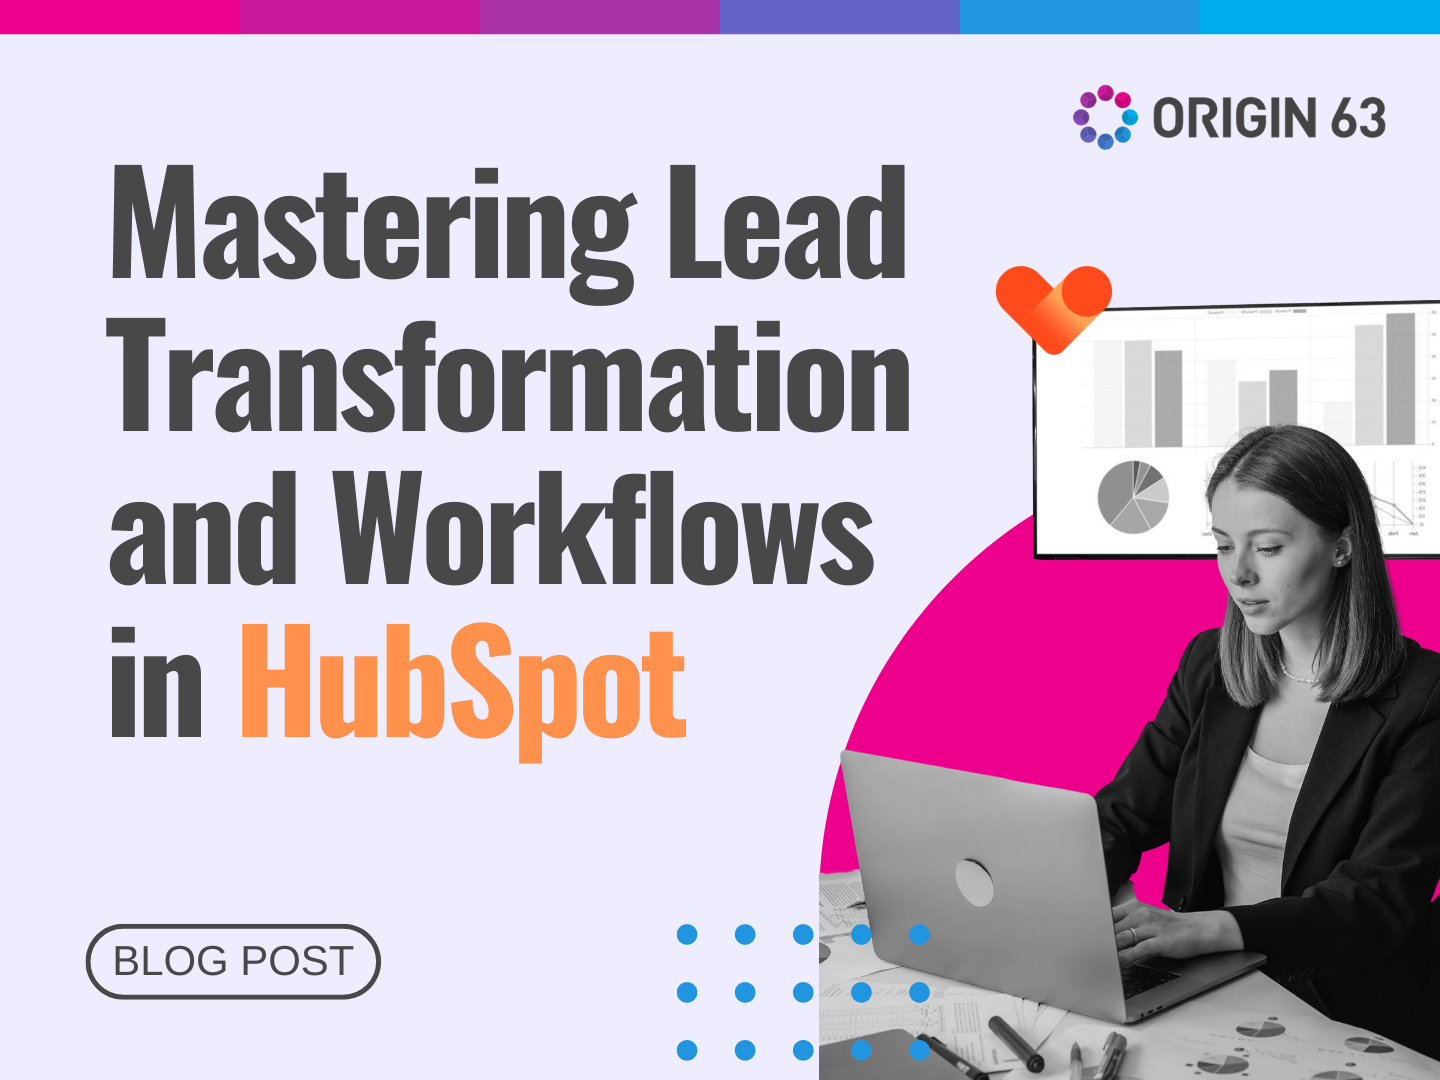 Master lead management with HubSpot's innovative features: automation, pipeline visibility, and seamless deal creation.